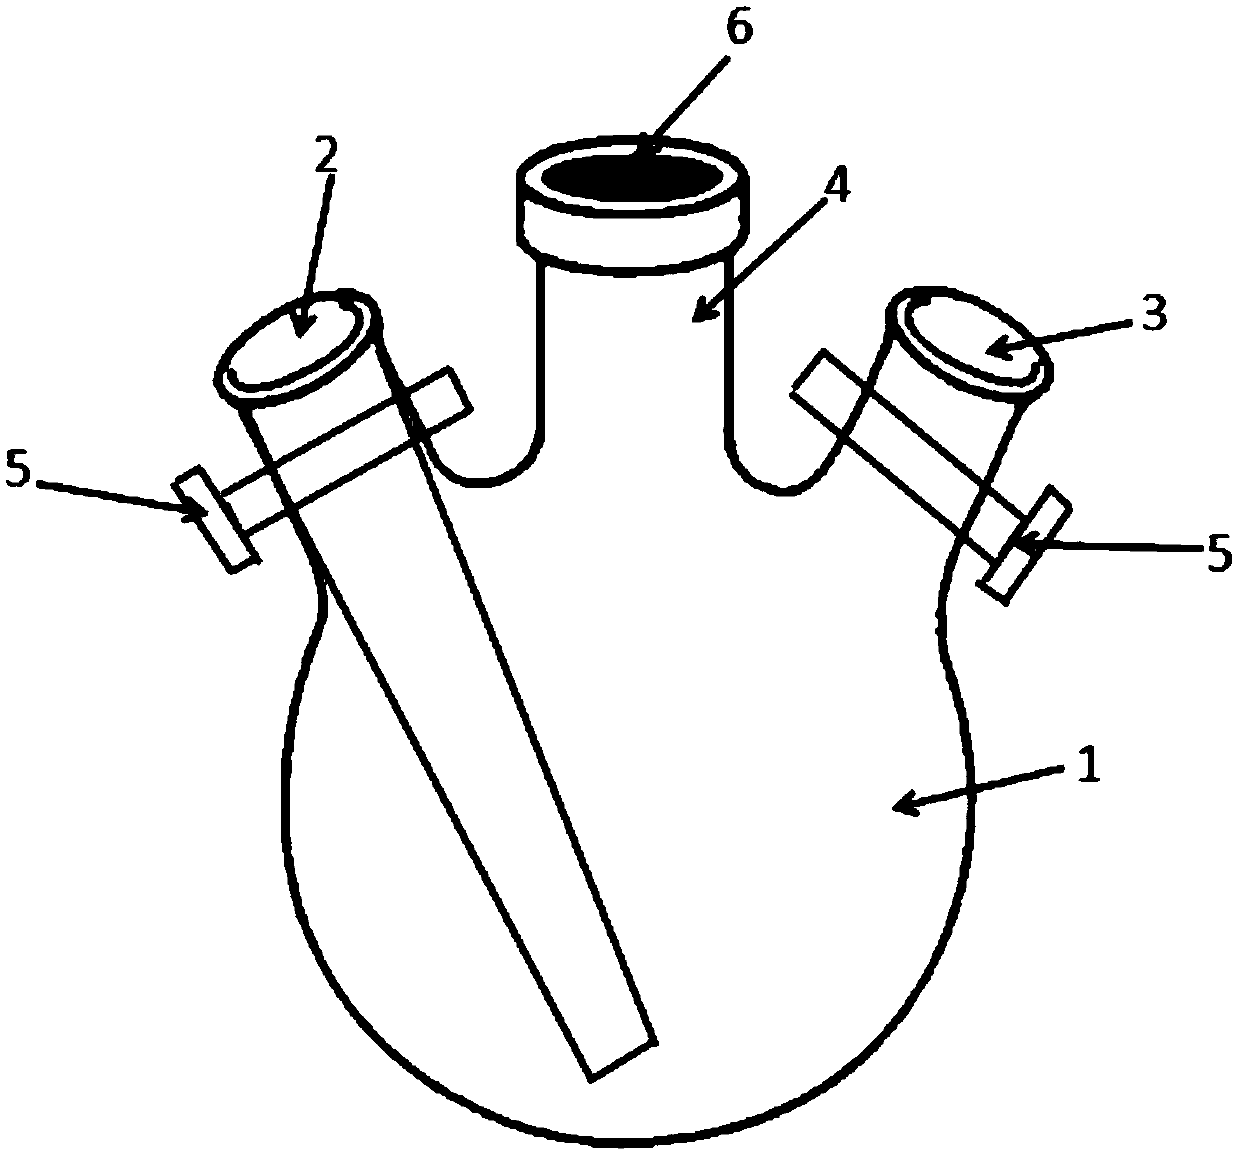 A device and method for simply preparing VOC gas